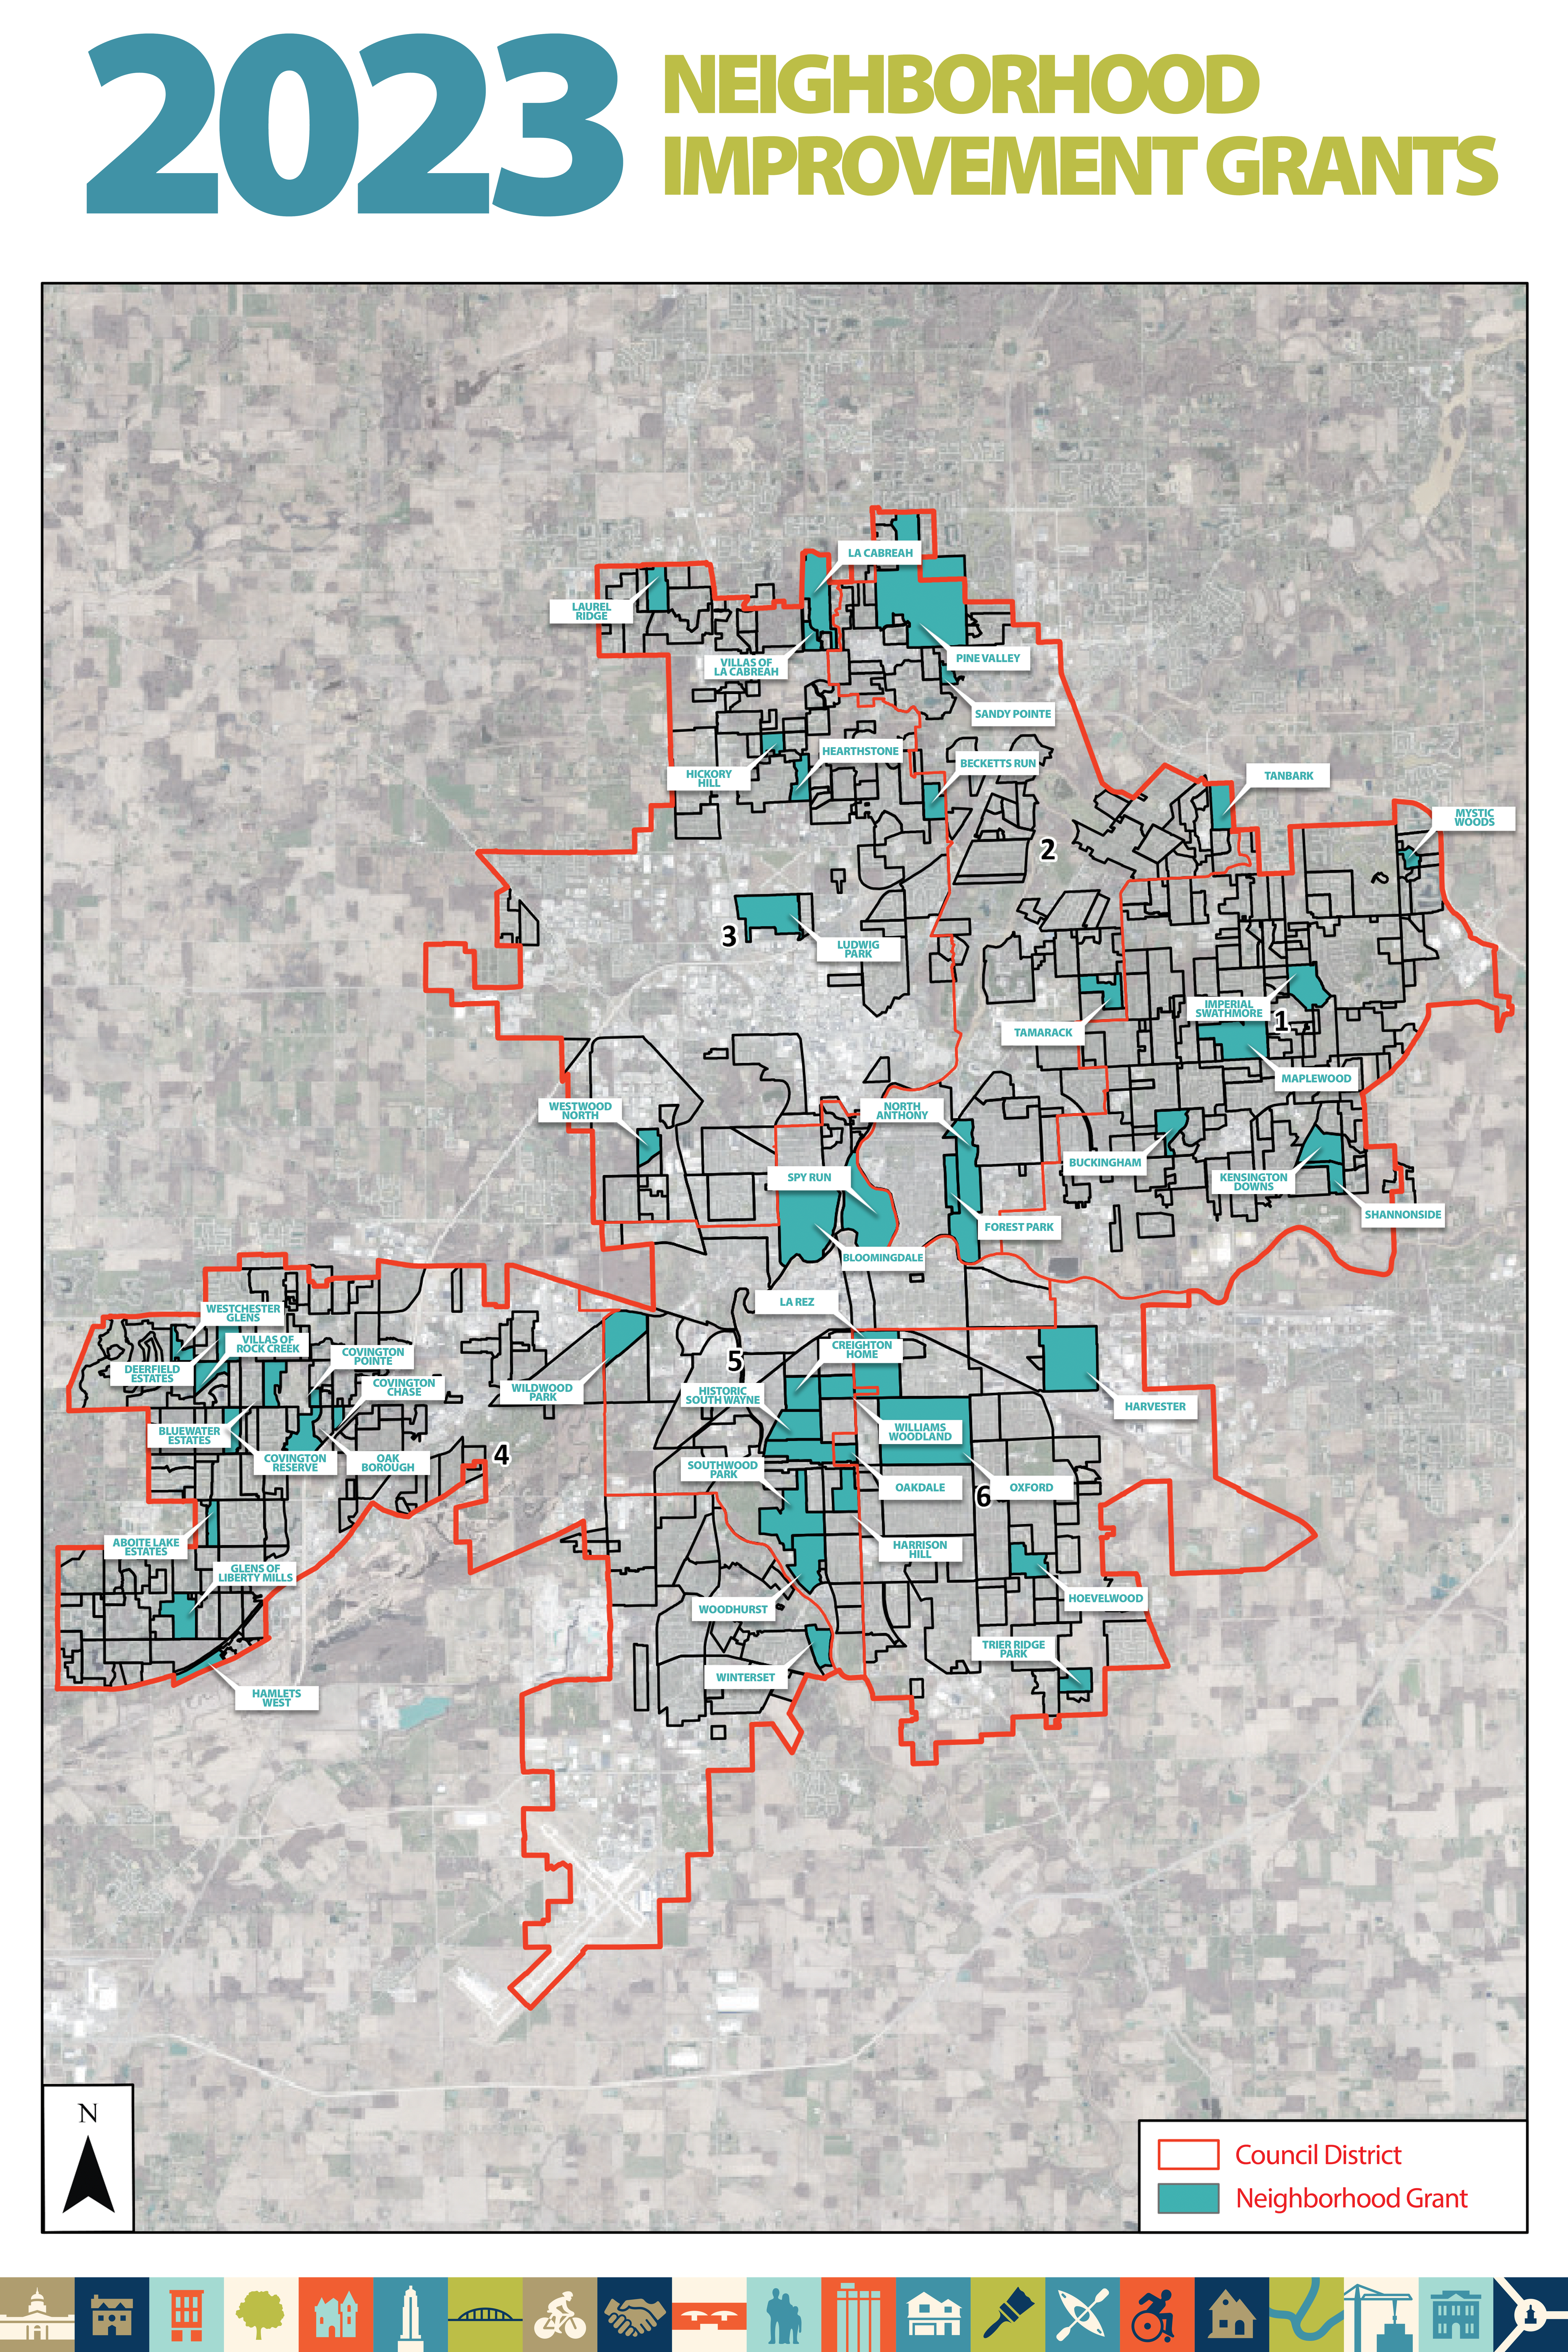 2023 Neighborhood Improvement Grant Map by Council District